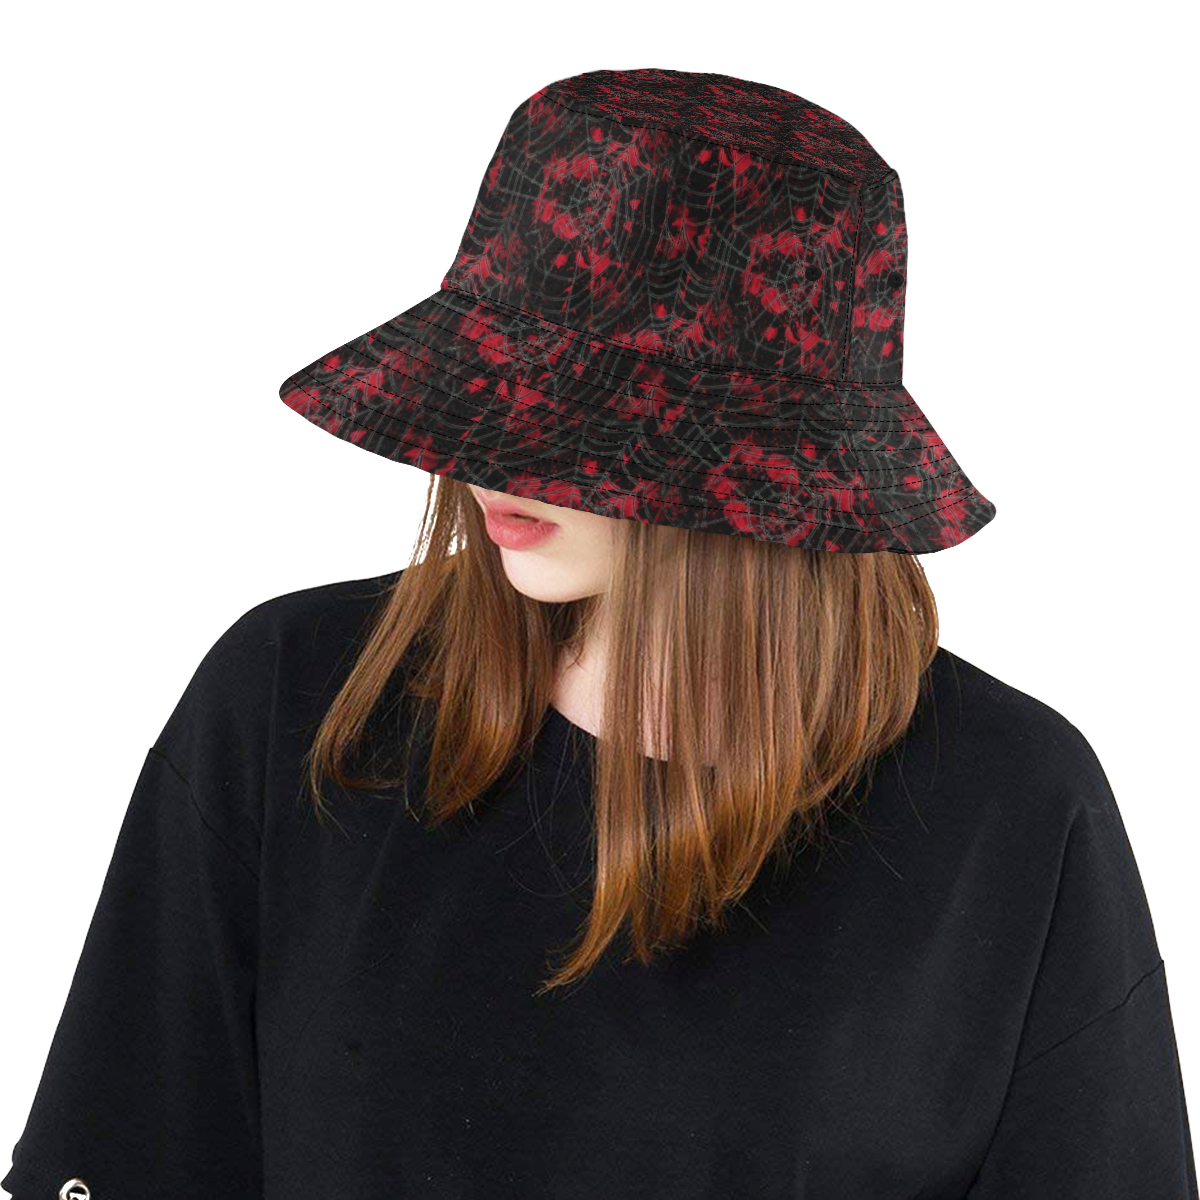 Scary Spiderby Artdream All Over Print Bucket Hat